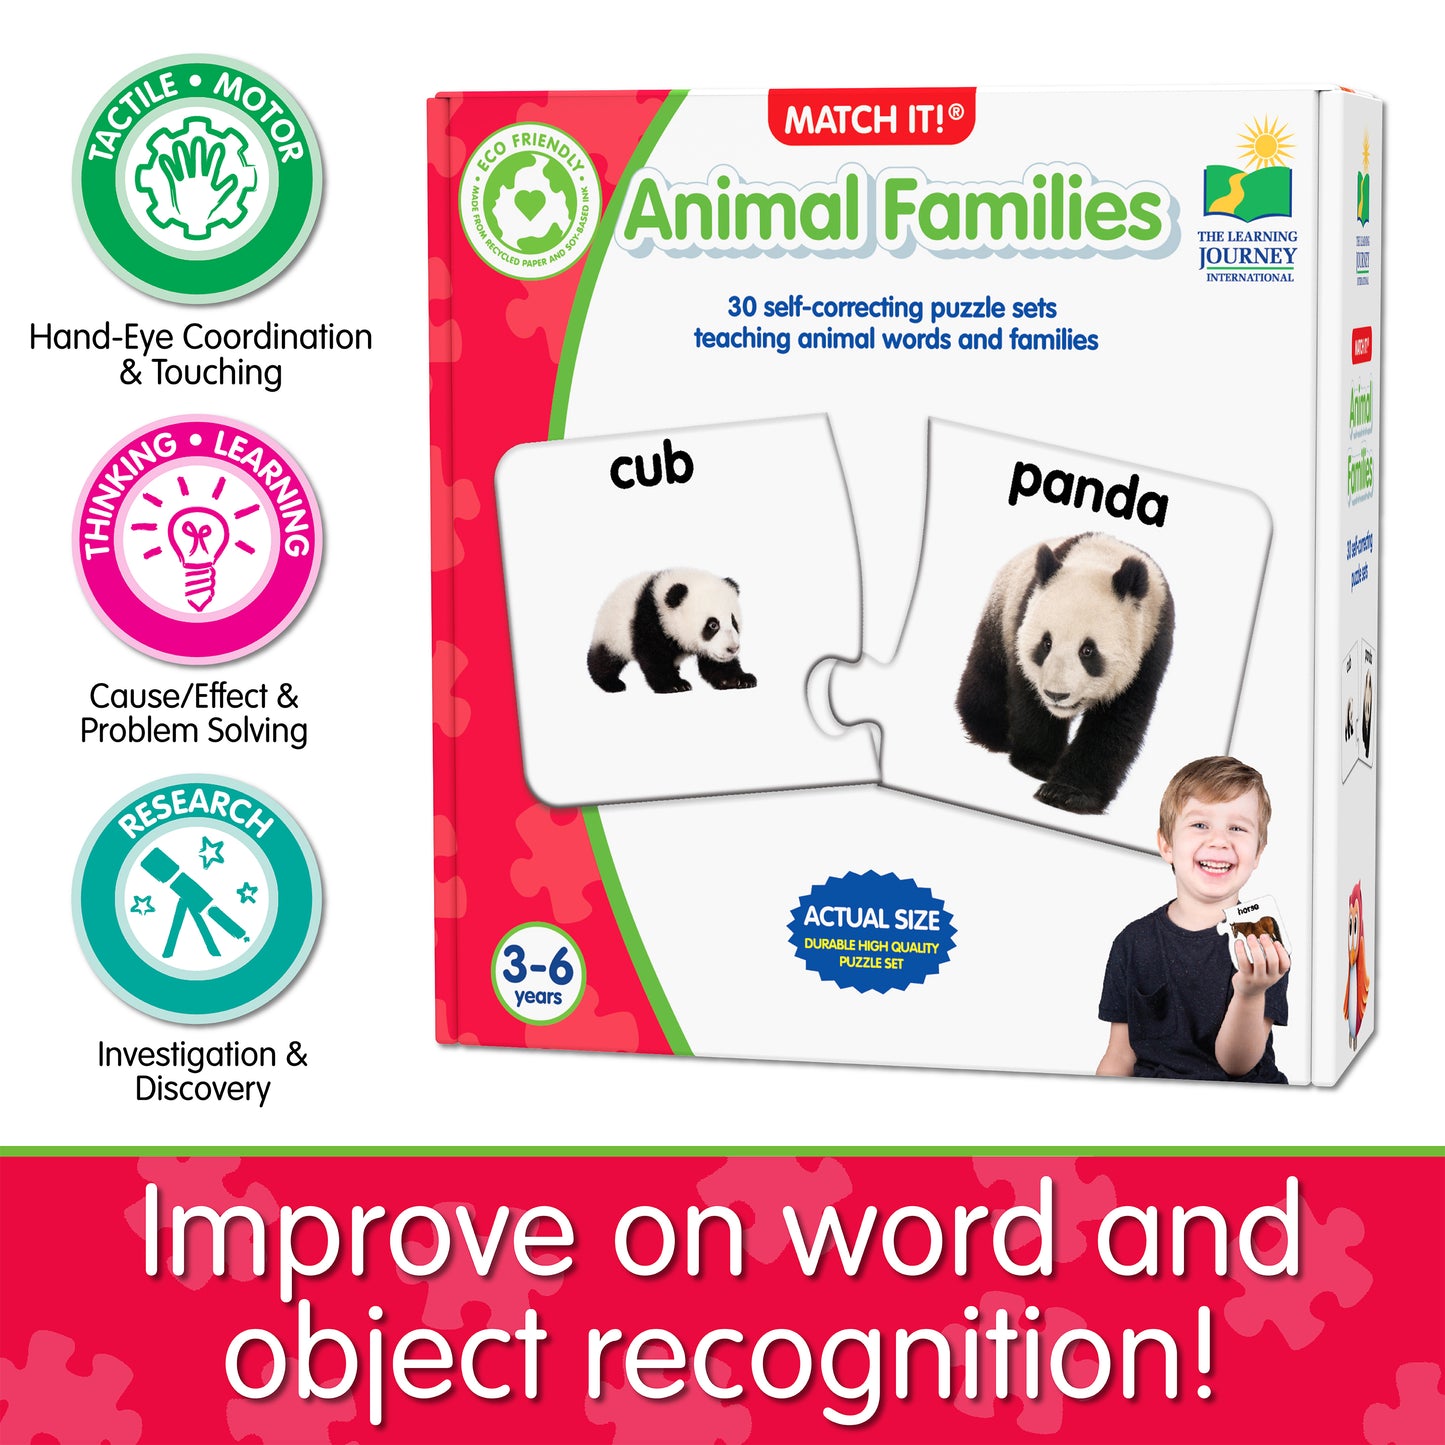 Infographic about Match It - Animal Friends' educational benefits that says, "Improve on word and object recognition!"